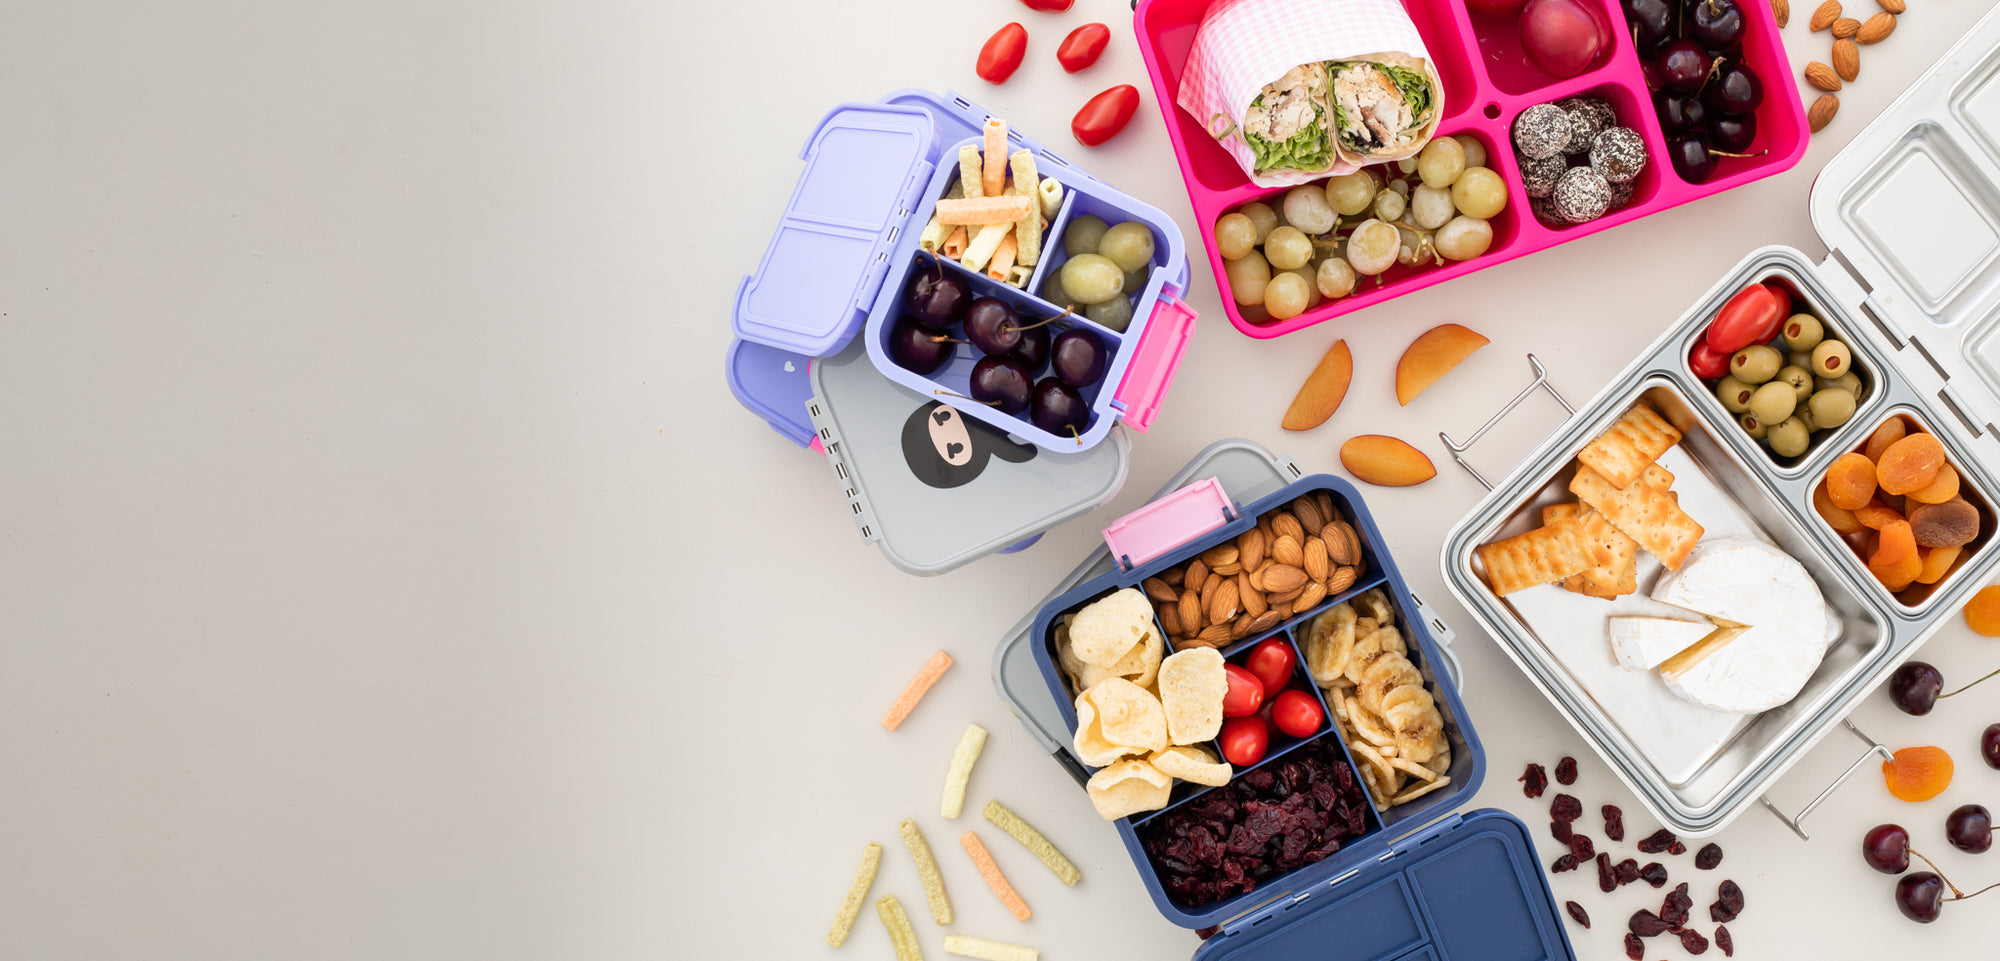 All Natural Mums lunch time and on the go essentials.  Lunch boxes, water bottles and children's tableware